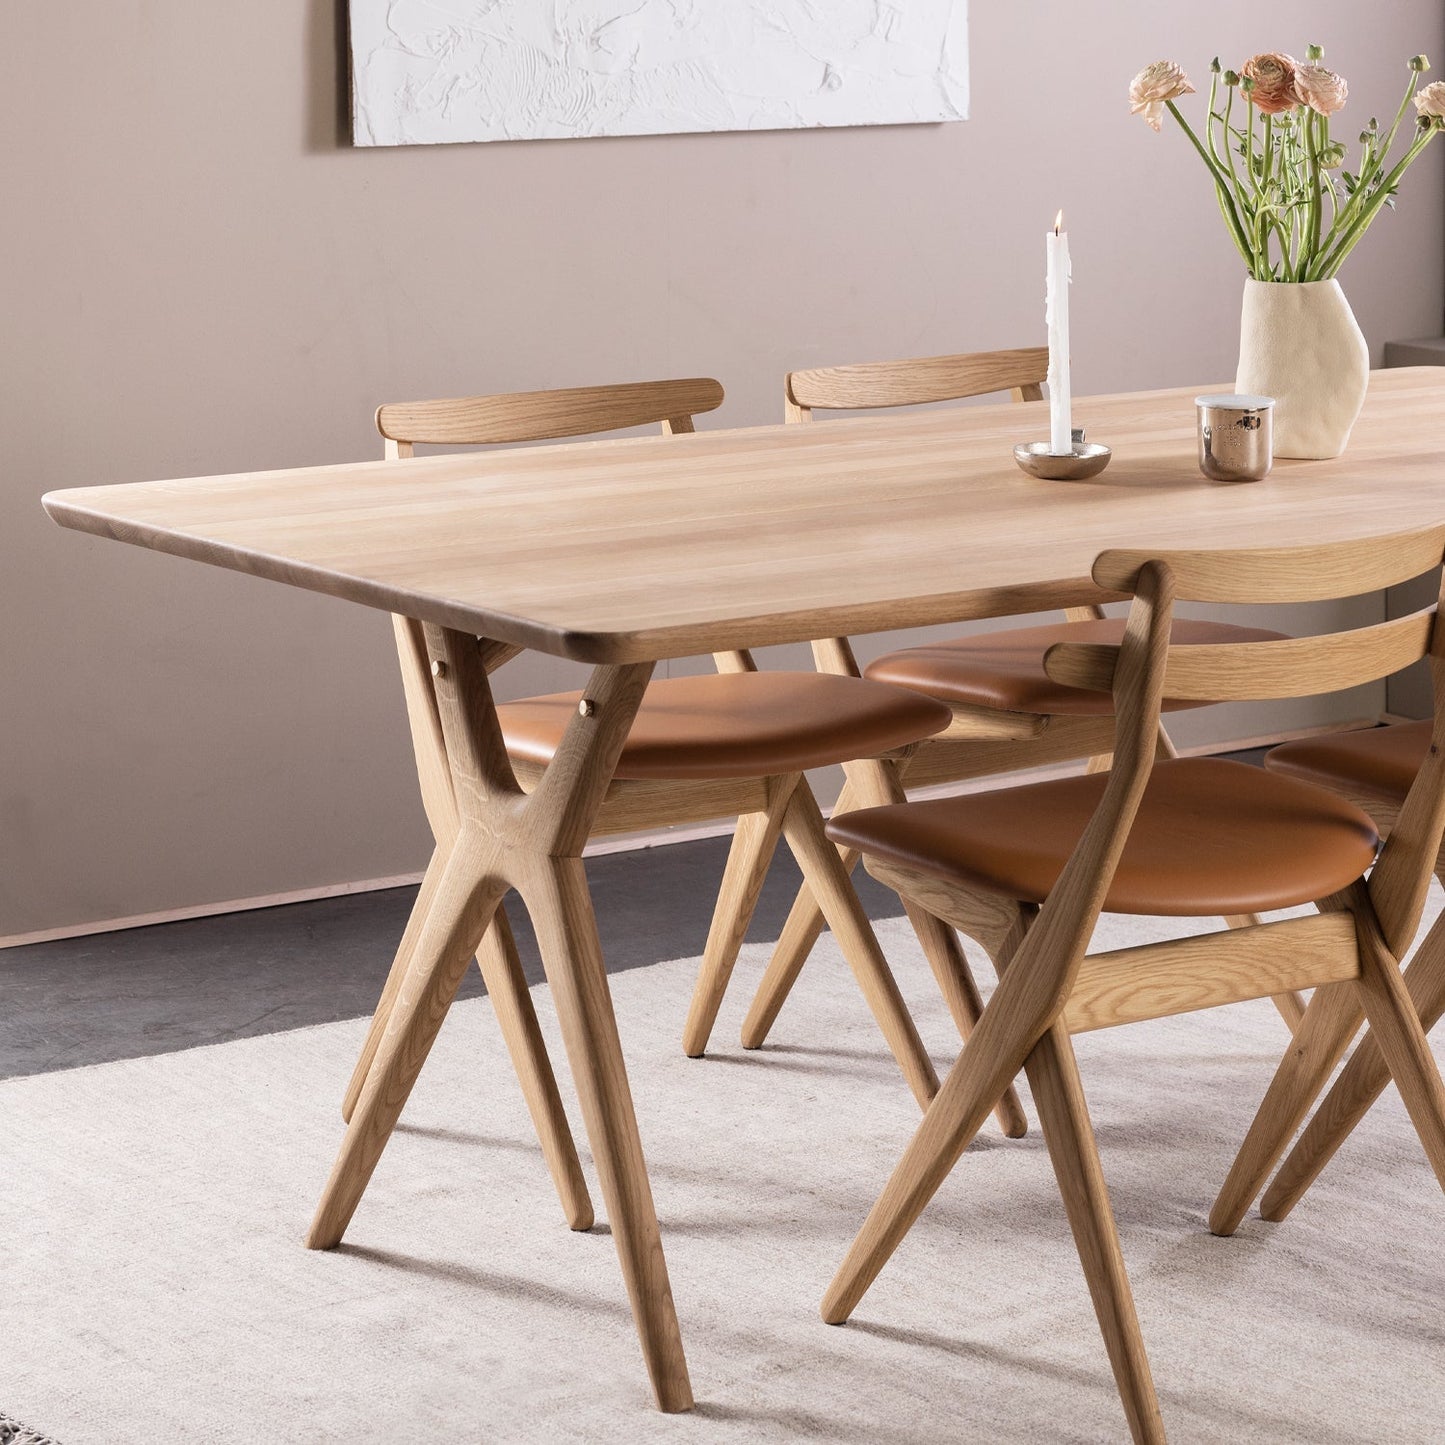 Rose Hill Oak Dining Table With Rounded Corners With Brass - 260cm Extending